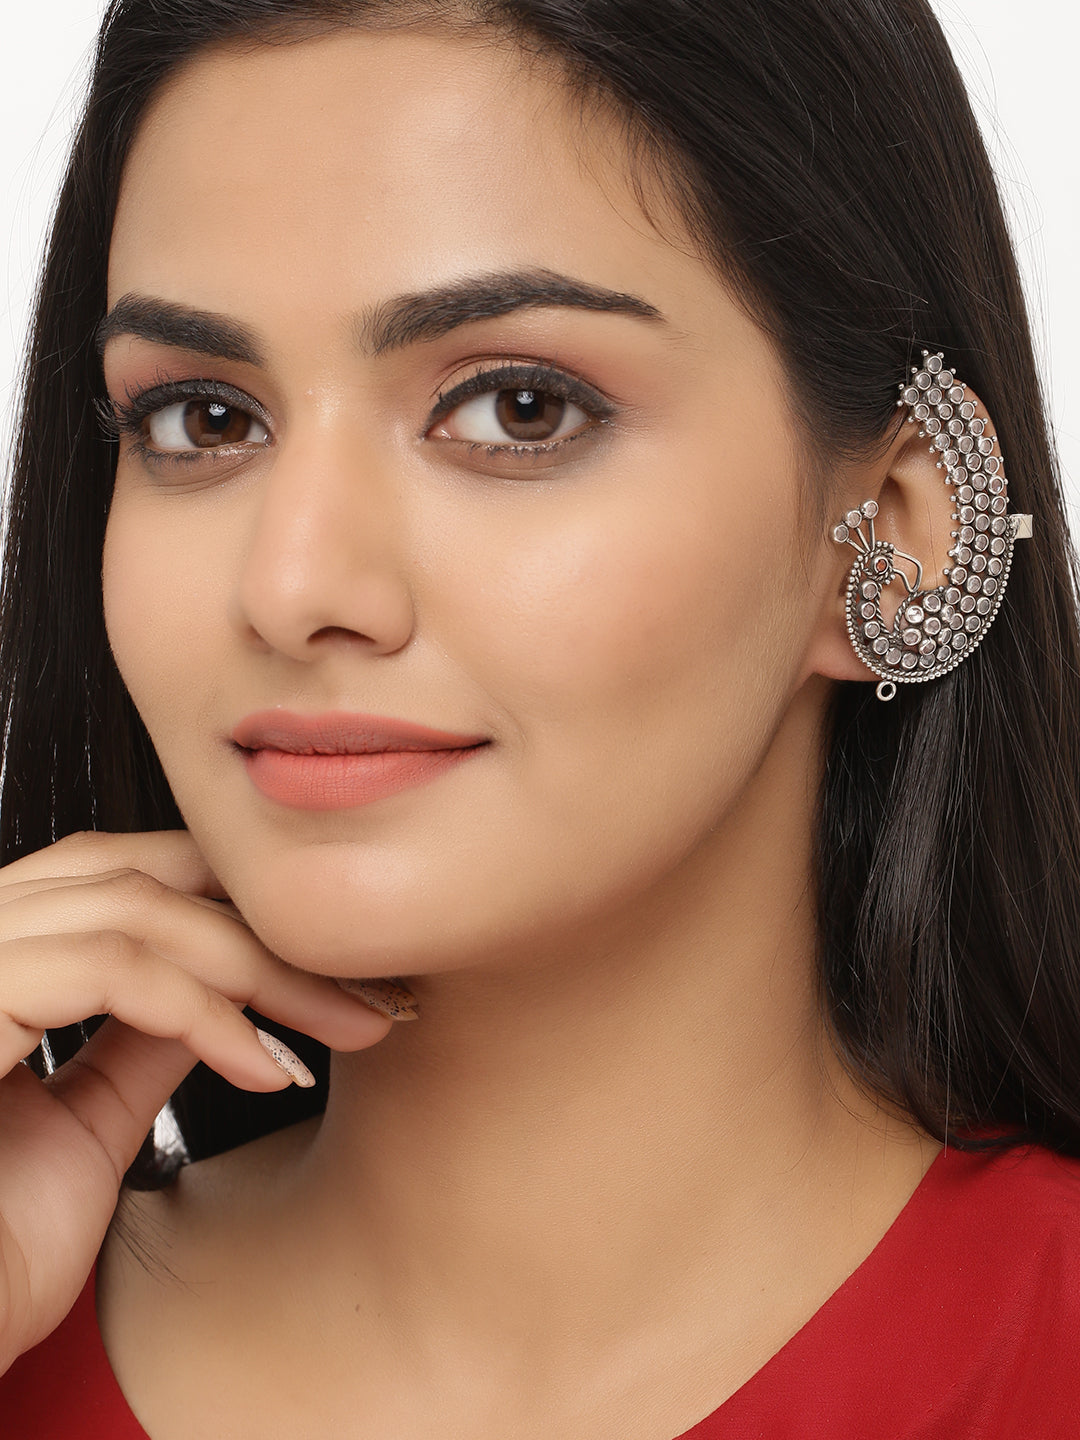 Buy Silver Color Printed Stud Earring, Push-back Stud Earring, Round Stud  Earring, Designer Earring, Casual Earring, Stud Online in India - Etsy | Online  earrings, Stud earrings, Earrings